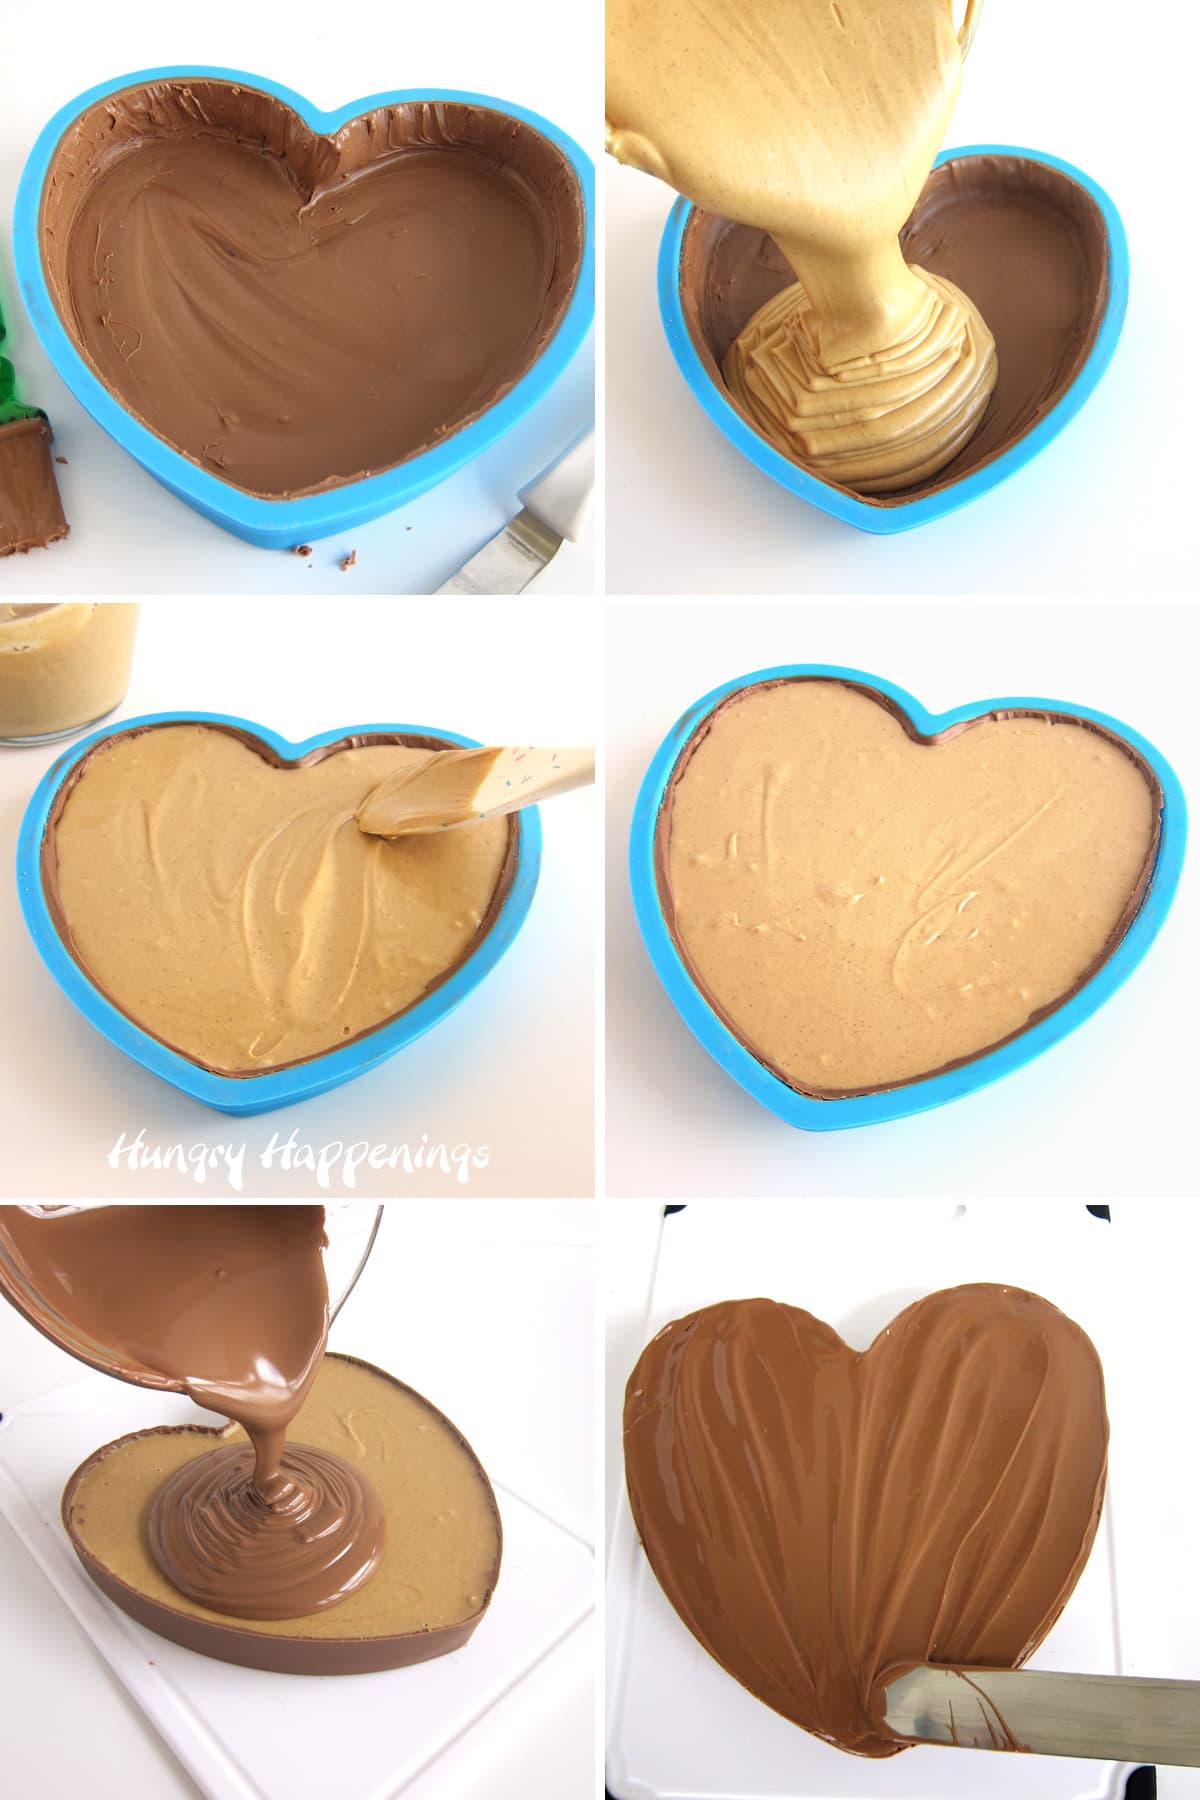 Fill milk chocolate heart with creamy peanut butter fudge, then top with more chocolate.